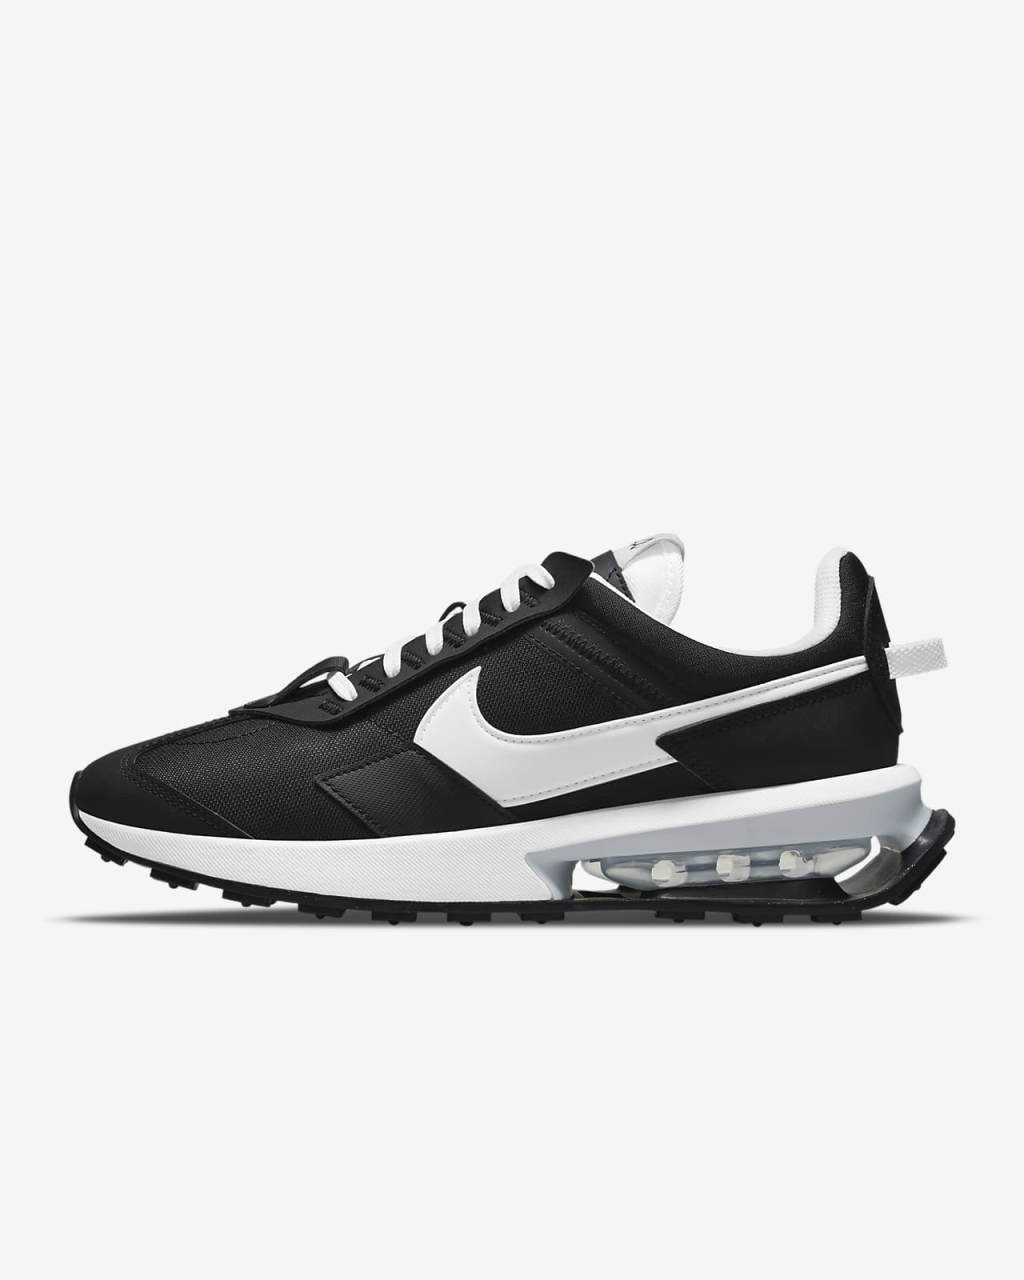 Picture of: Nike Air Max Pre-Day Damenschuh